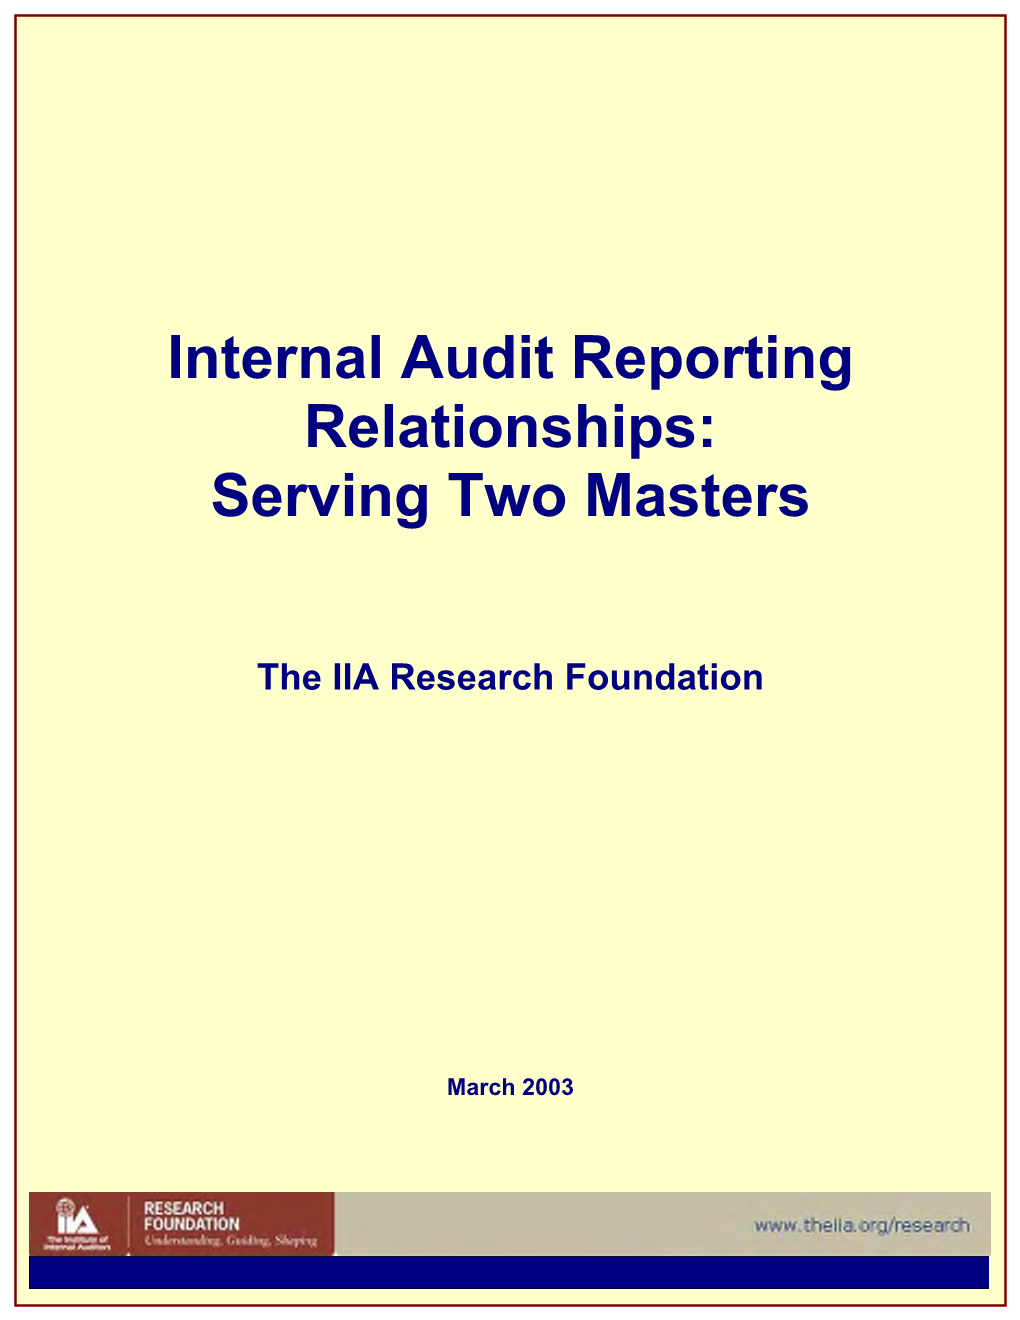 Internal Audit Reporting Relationships: Serving Two Masters